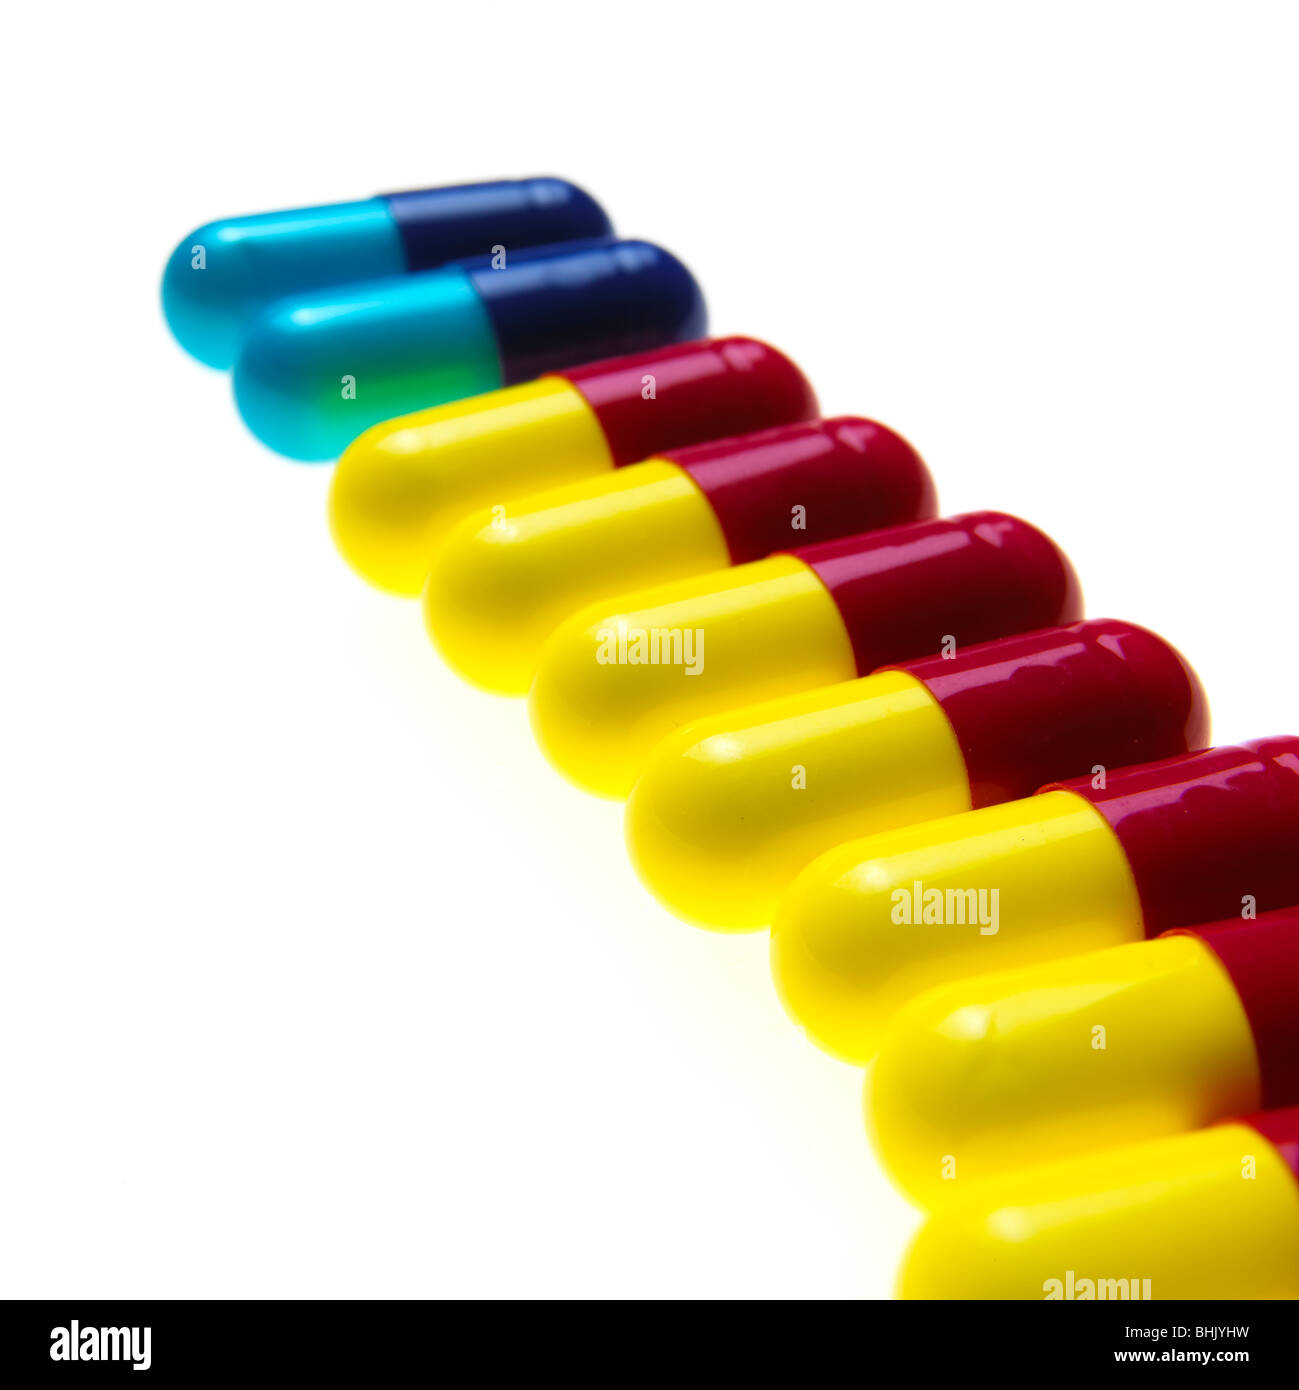 blue, red and yellow flu capsules on a white background Stock Photo